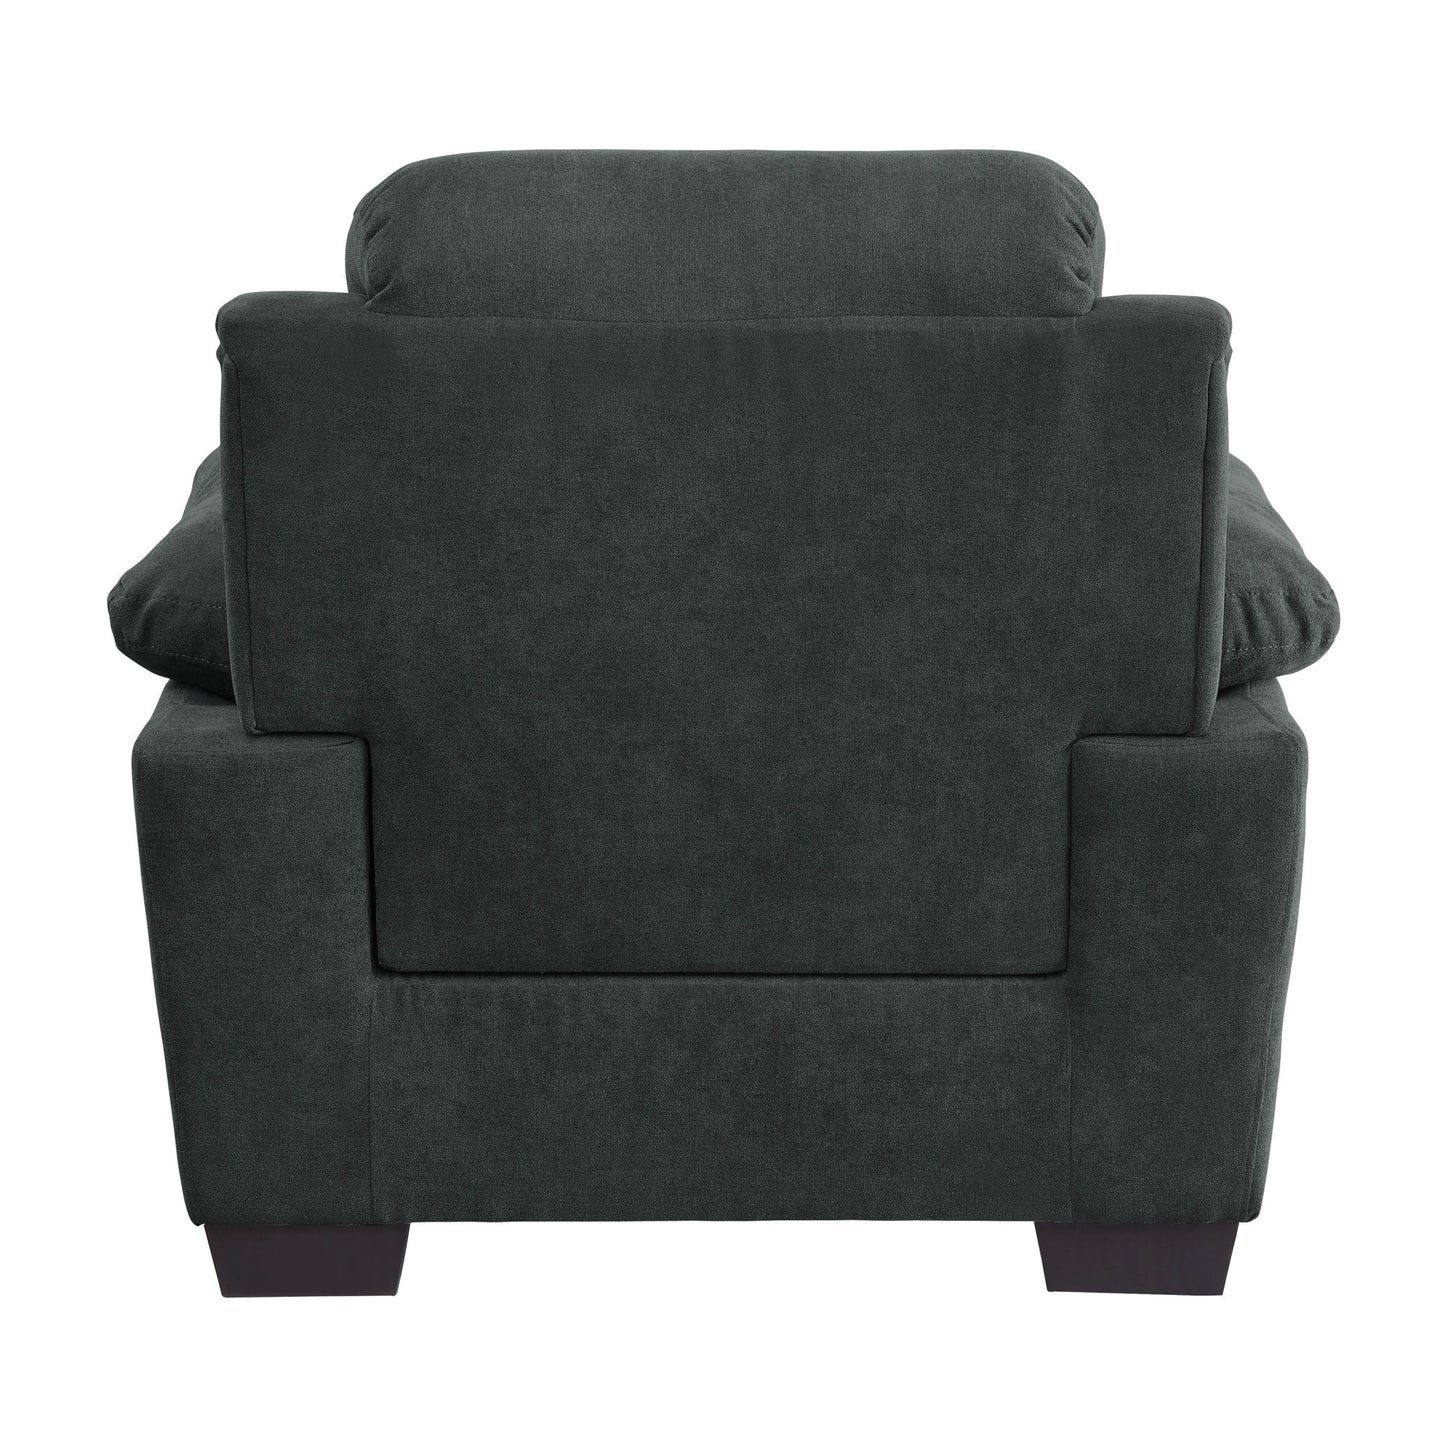 Plush Seating Chair 1pc Dark Gray Textured Fabric Channel Tufting Solid Wood Frame Modern Living Room Furniture Home Decor by Design